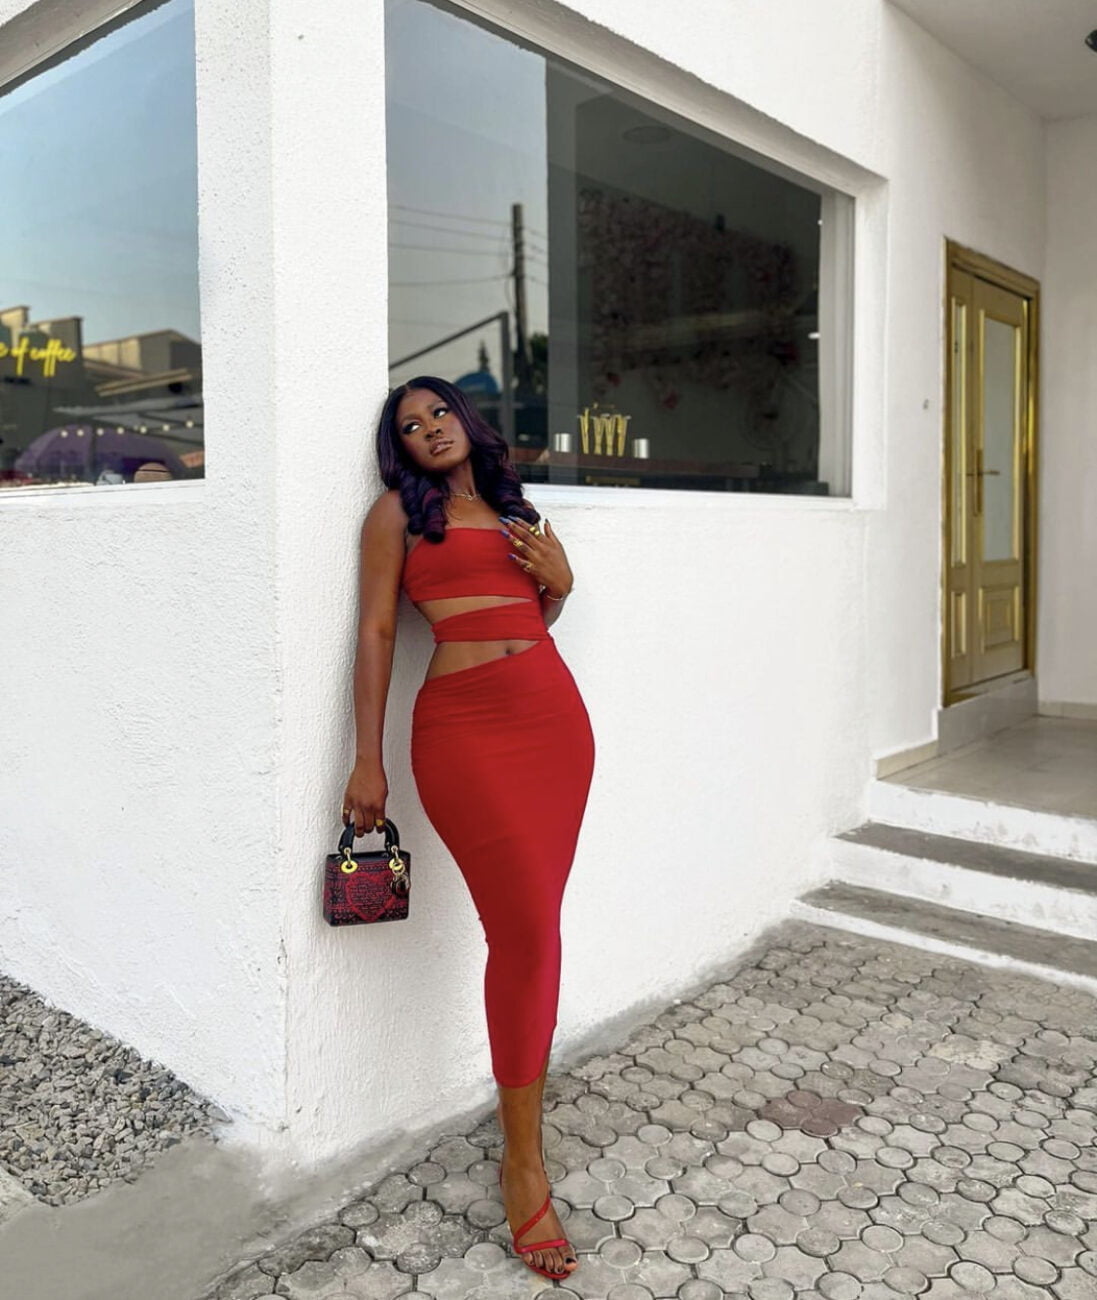 Lady in red: Alex Unusual slays in a red dress.